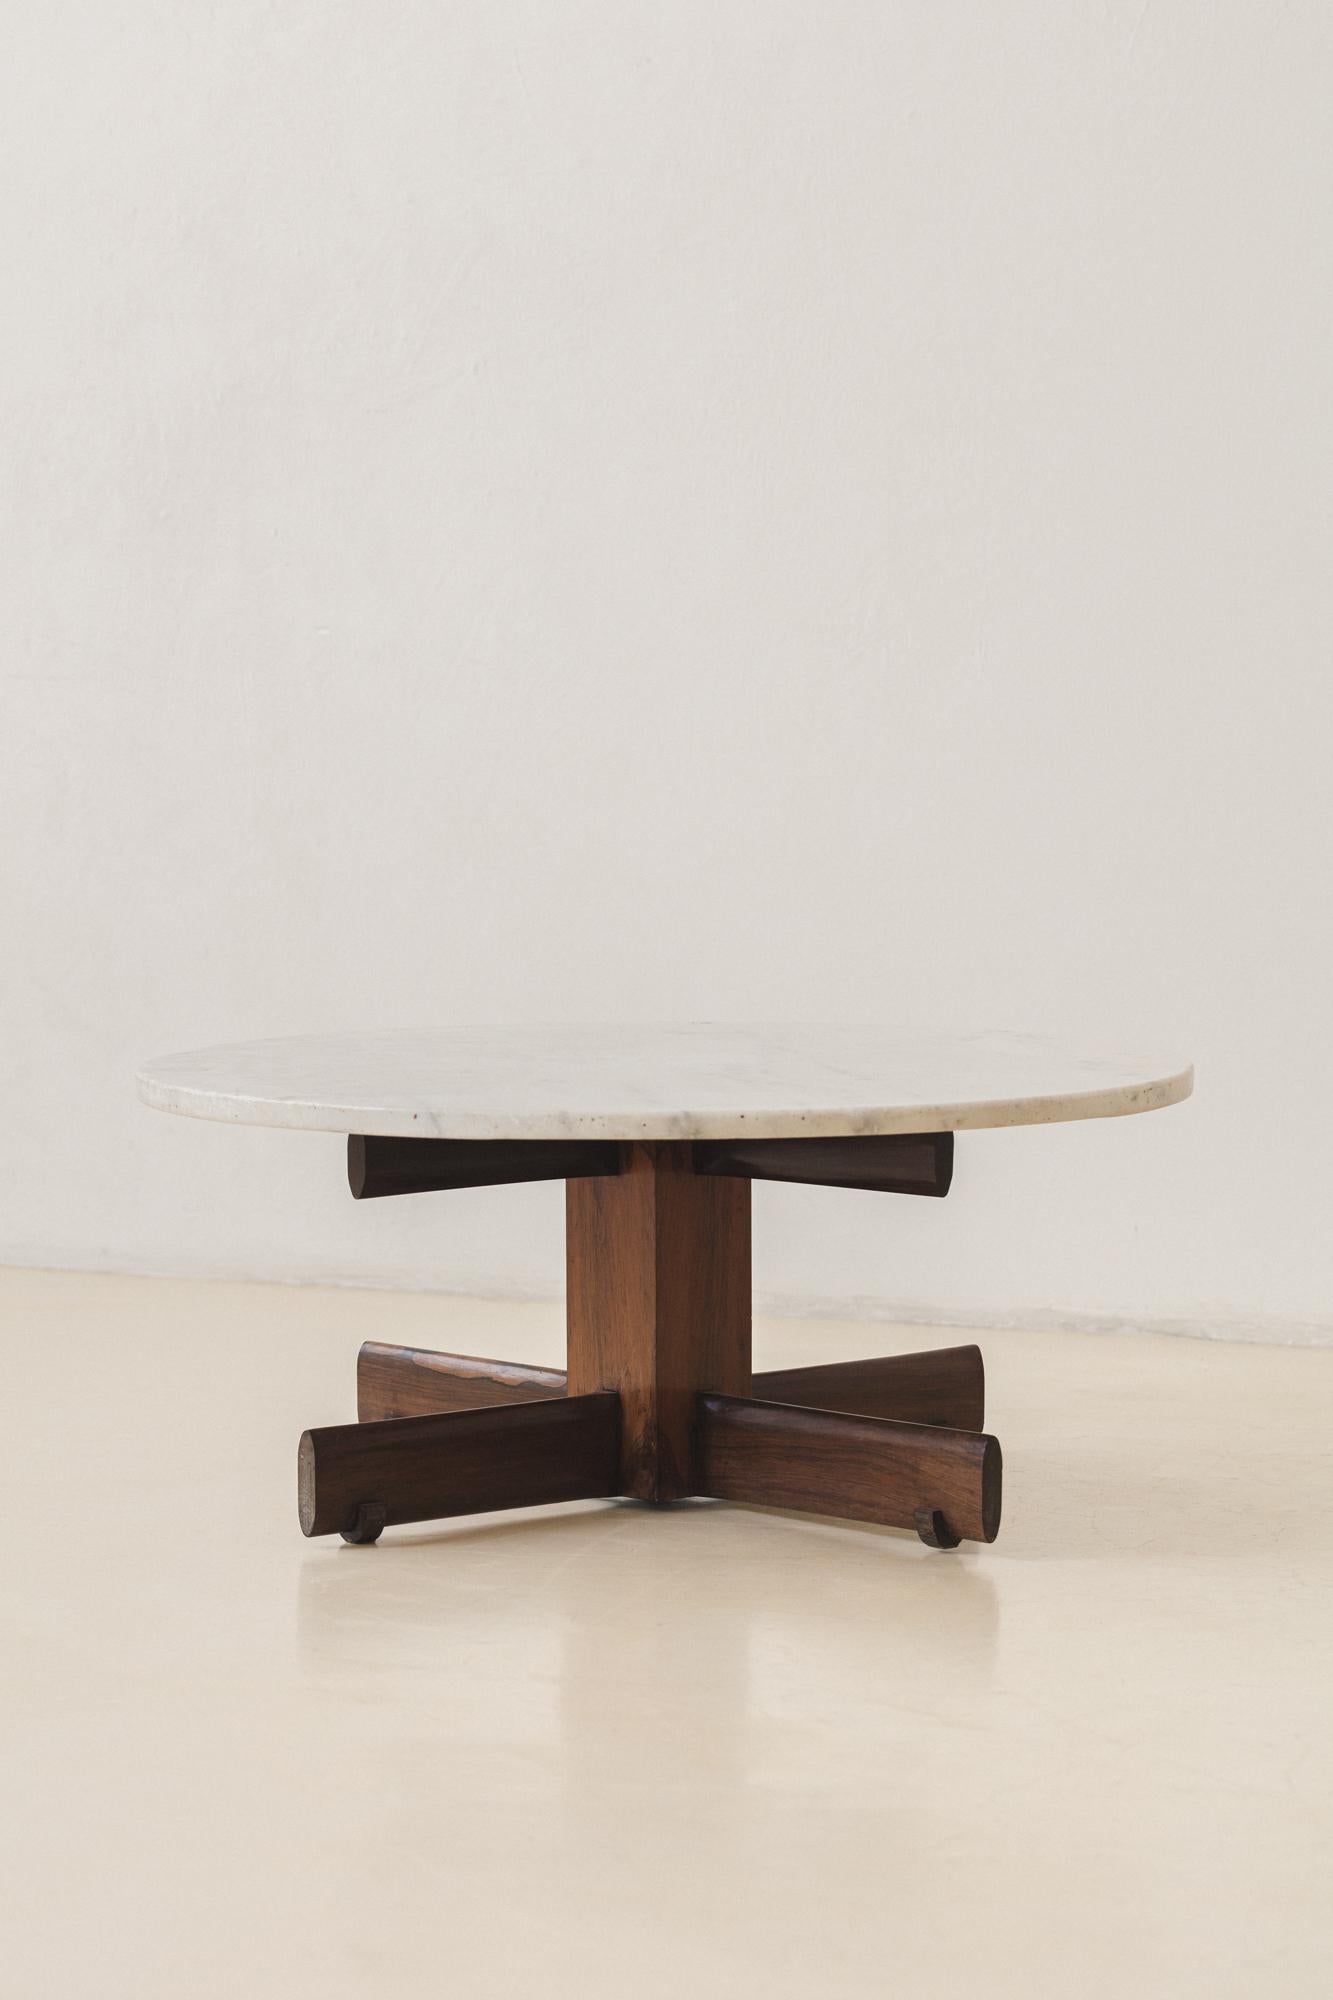 This round coffee table was produced in the 1960s, with both feet and top cross-shaped.

This practical four-seat dining table features very well-built fittings, as the cross supports the top and the four charming wood pieces that touch the floor.